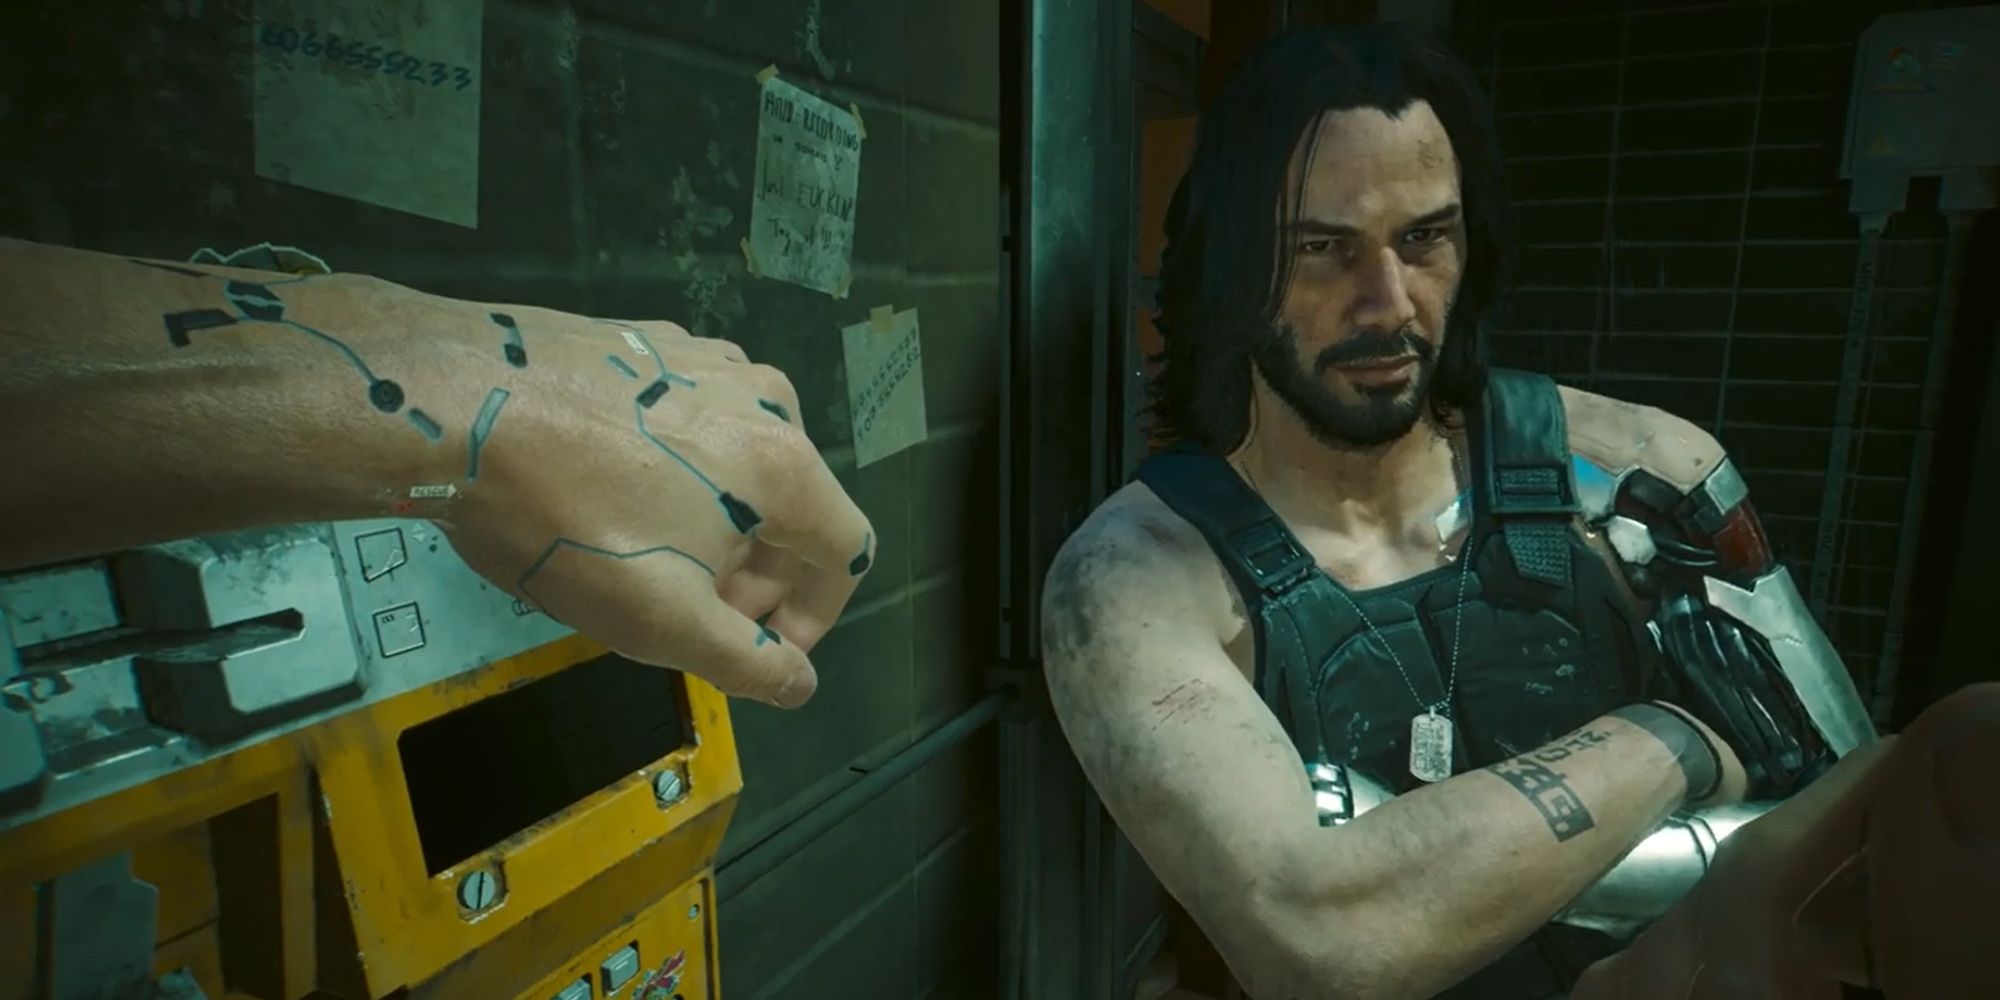 V using a payphone while Johnny Silverhand leans against the wall next to it in Cyberpunk 2077 Phantom Liberty